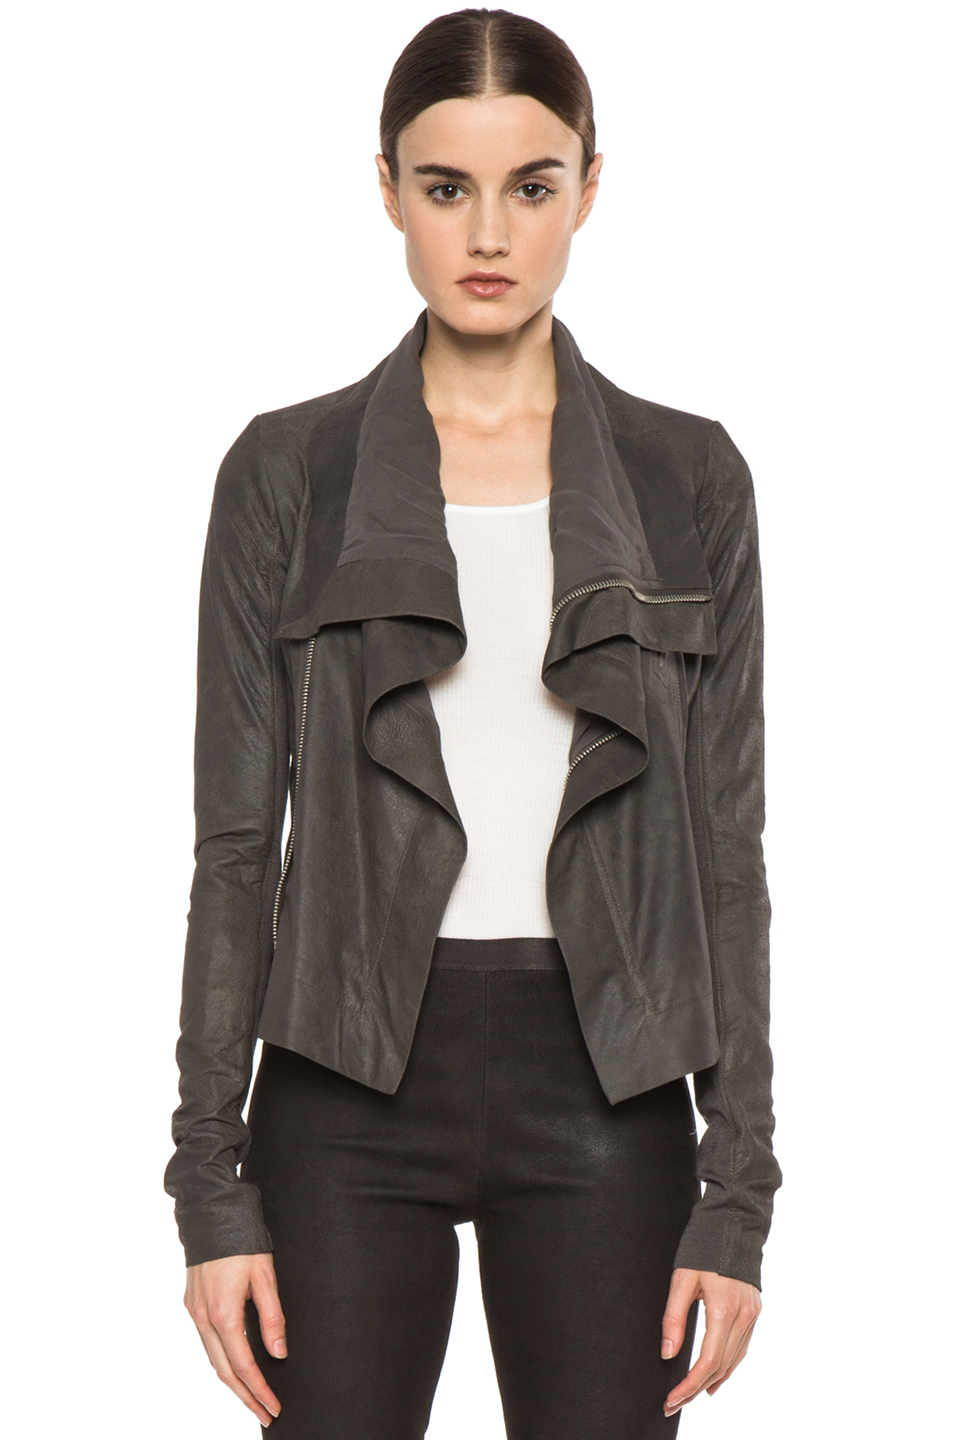 Rick Owens Classic Blistered Leather Biker Jacket in Dark Dust in Gray ...